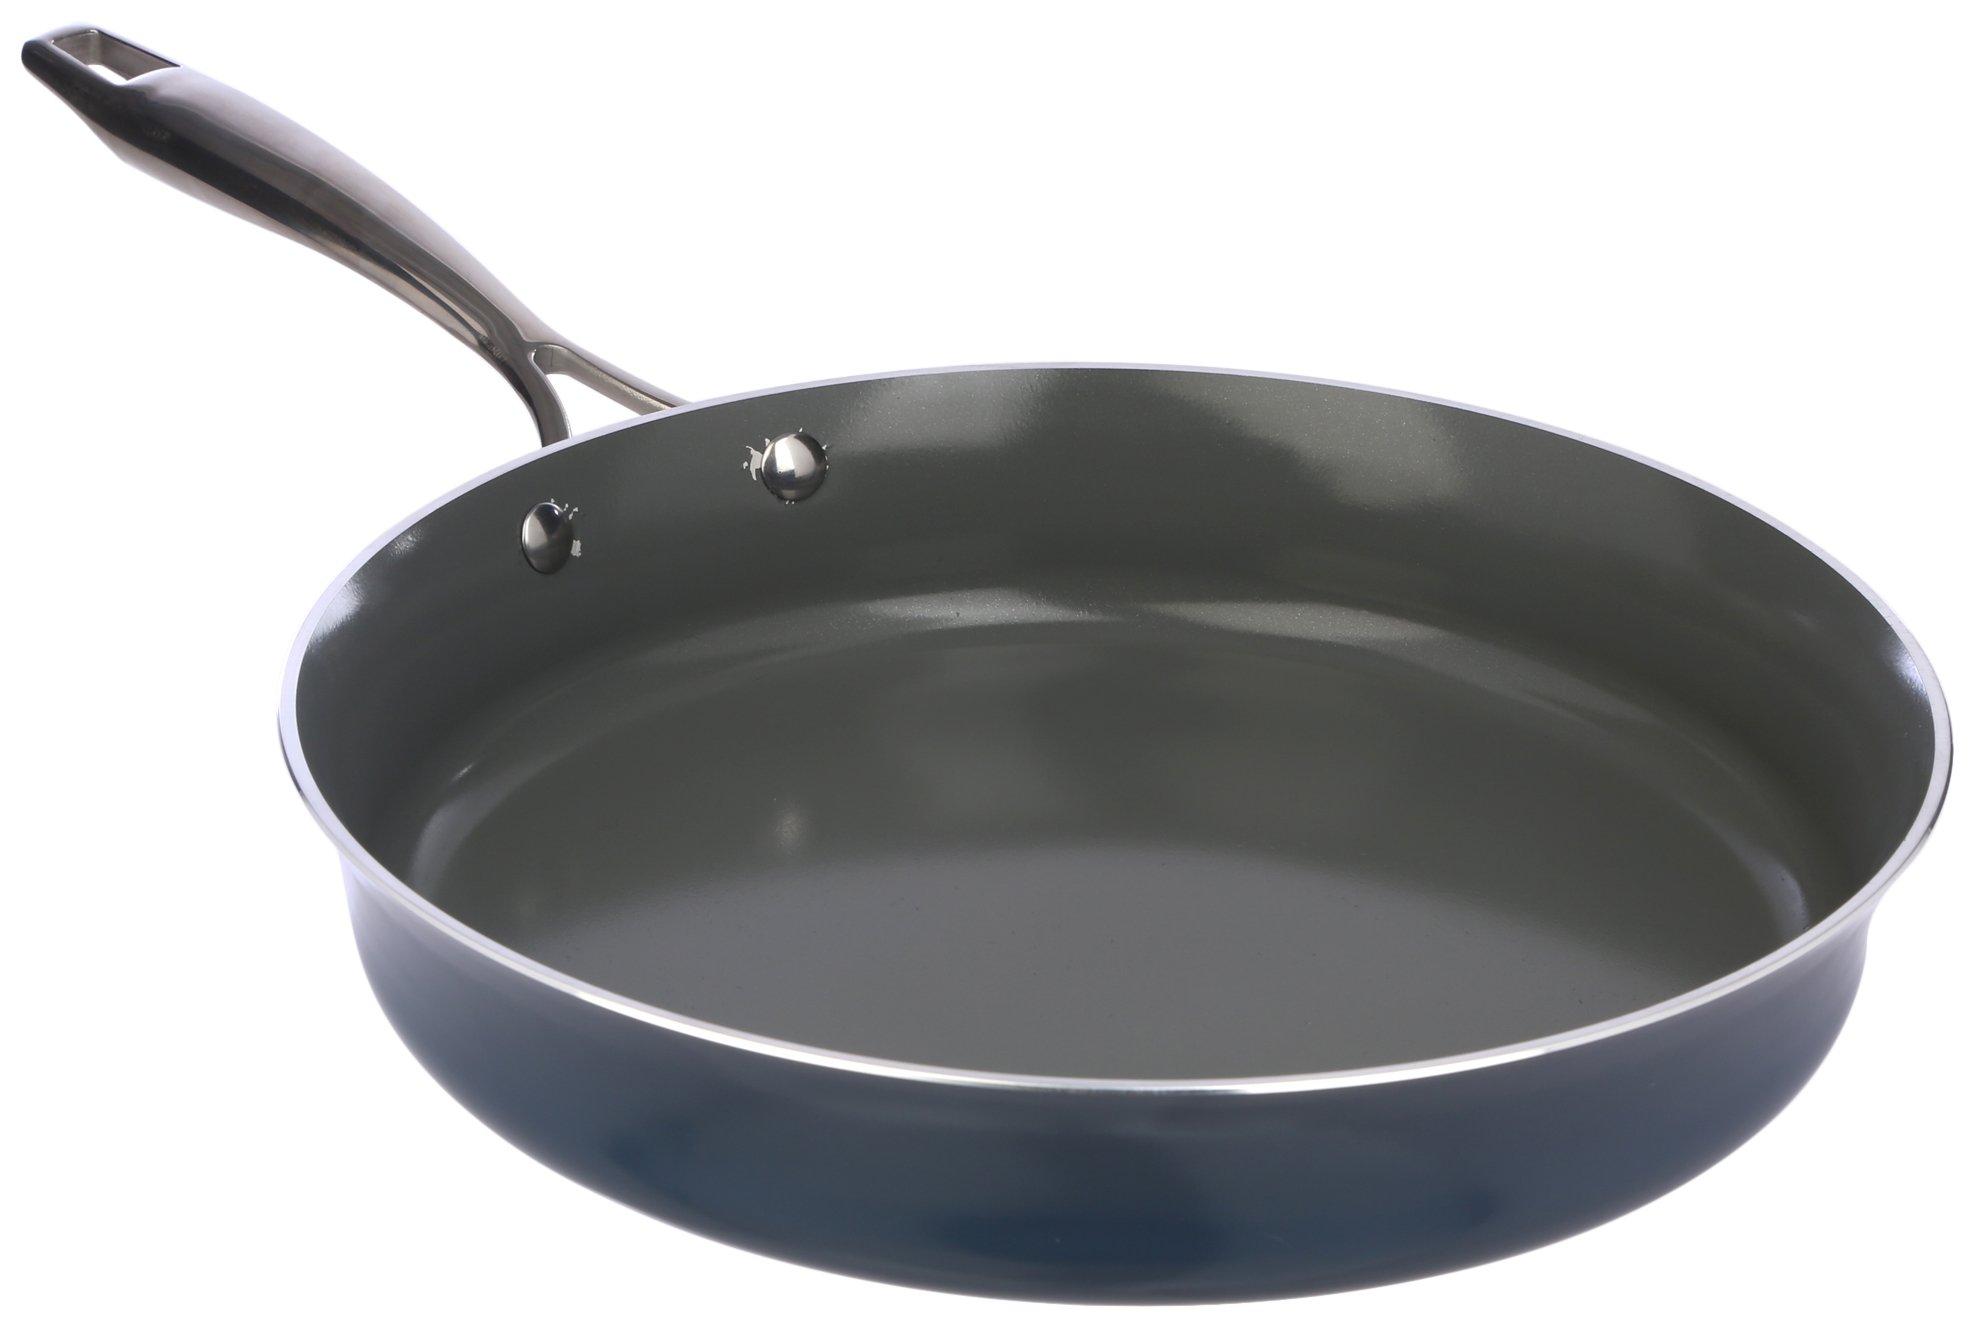 Zest Kitchen and Home 12 in. Ceramic Non-Stick